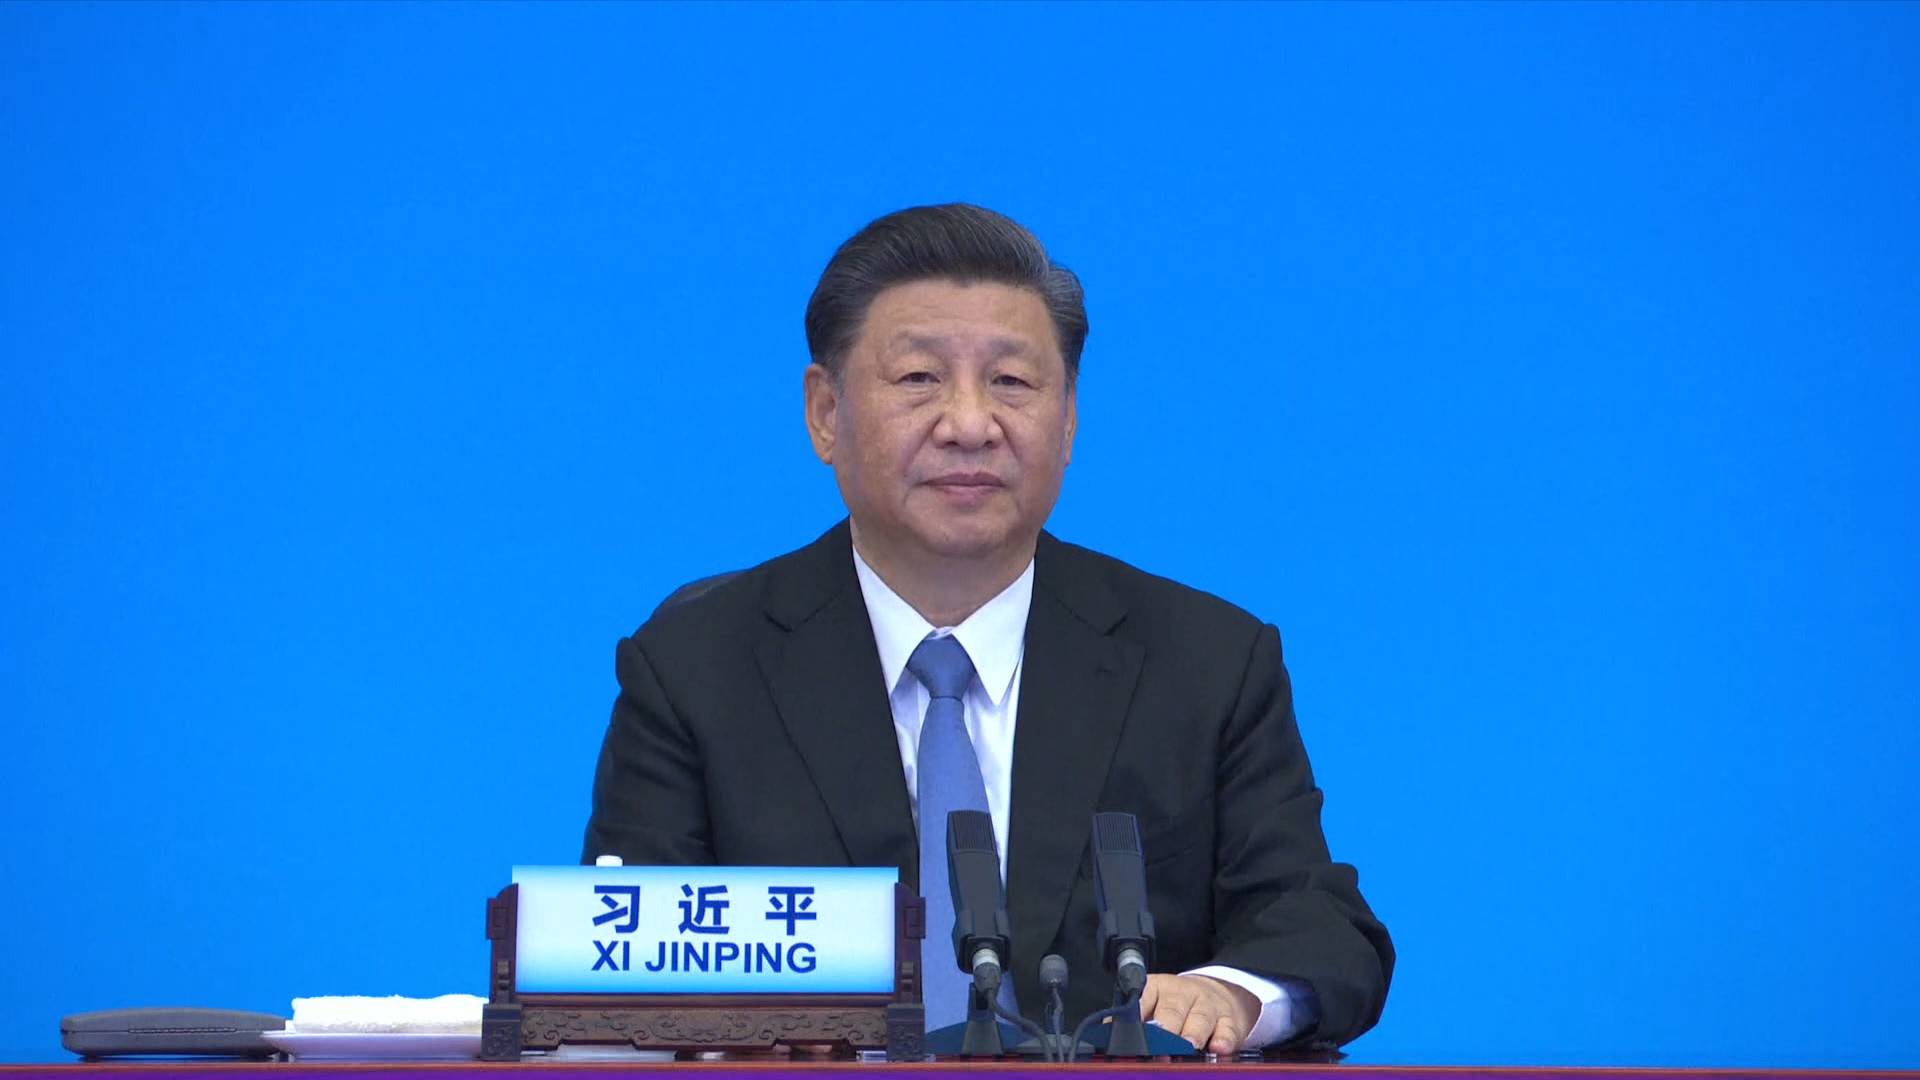 GLOBALink | Leave no country, nation behind in pursuit of human well-being: Xi